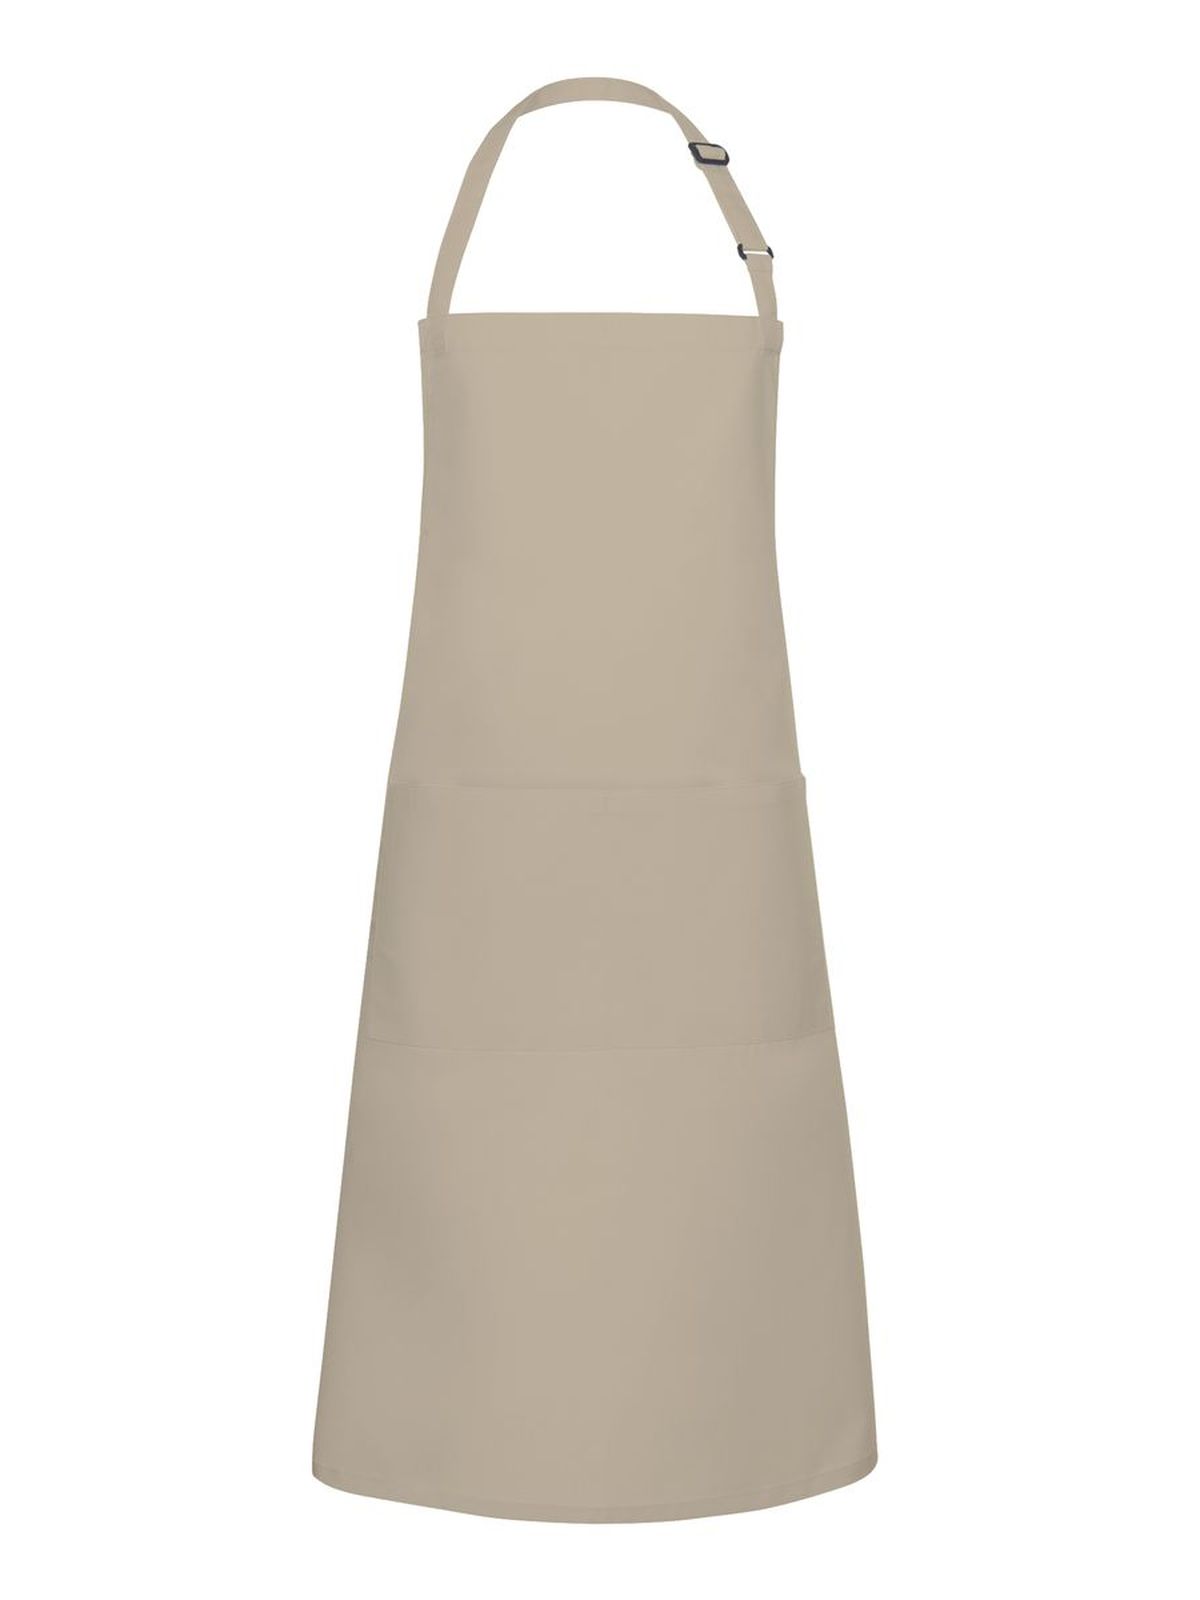 bistro-apron-basic-with-buckle-and-pocket-sand.webp